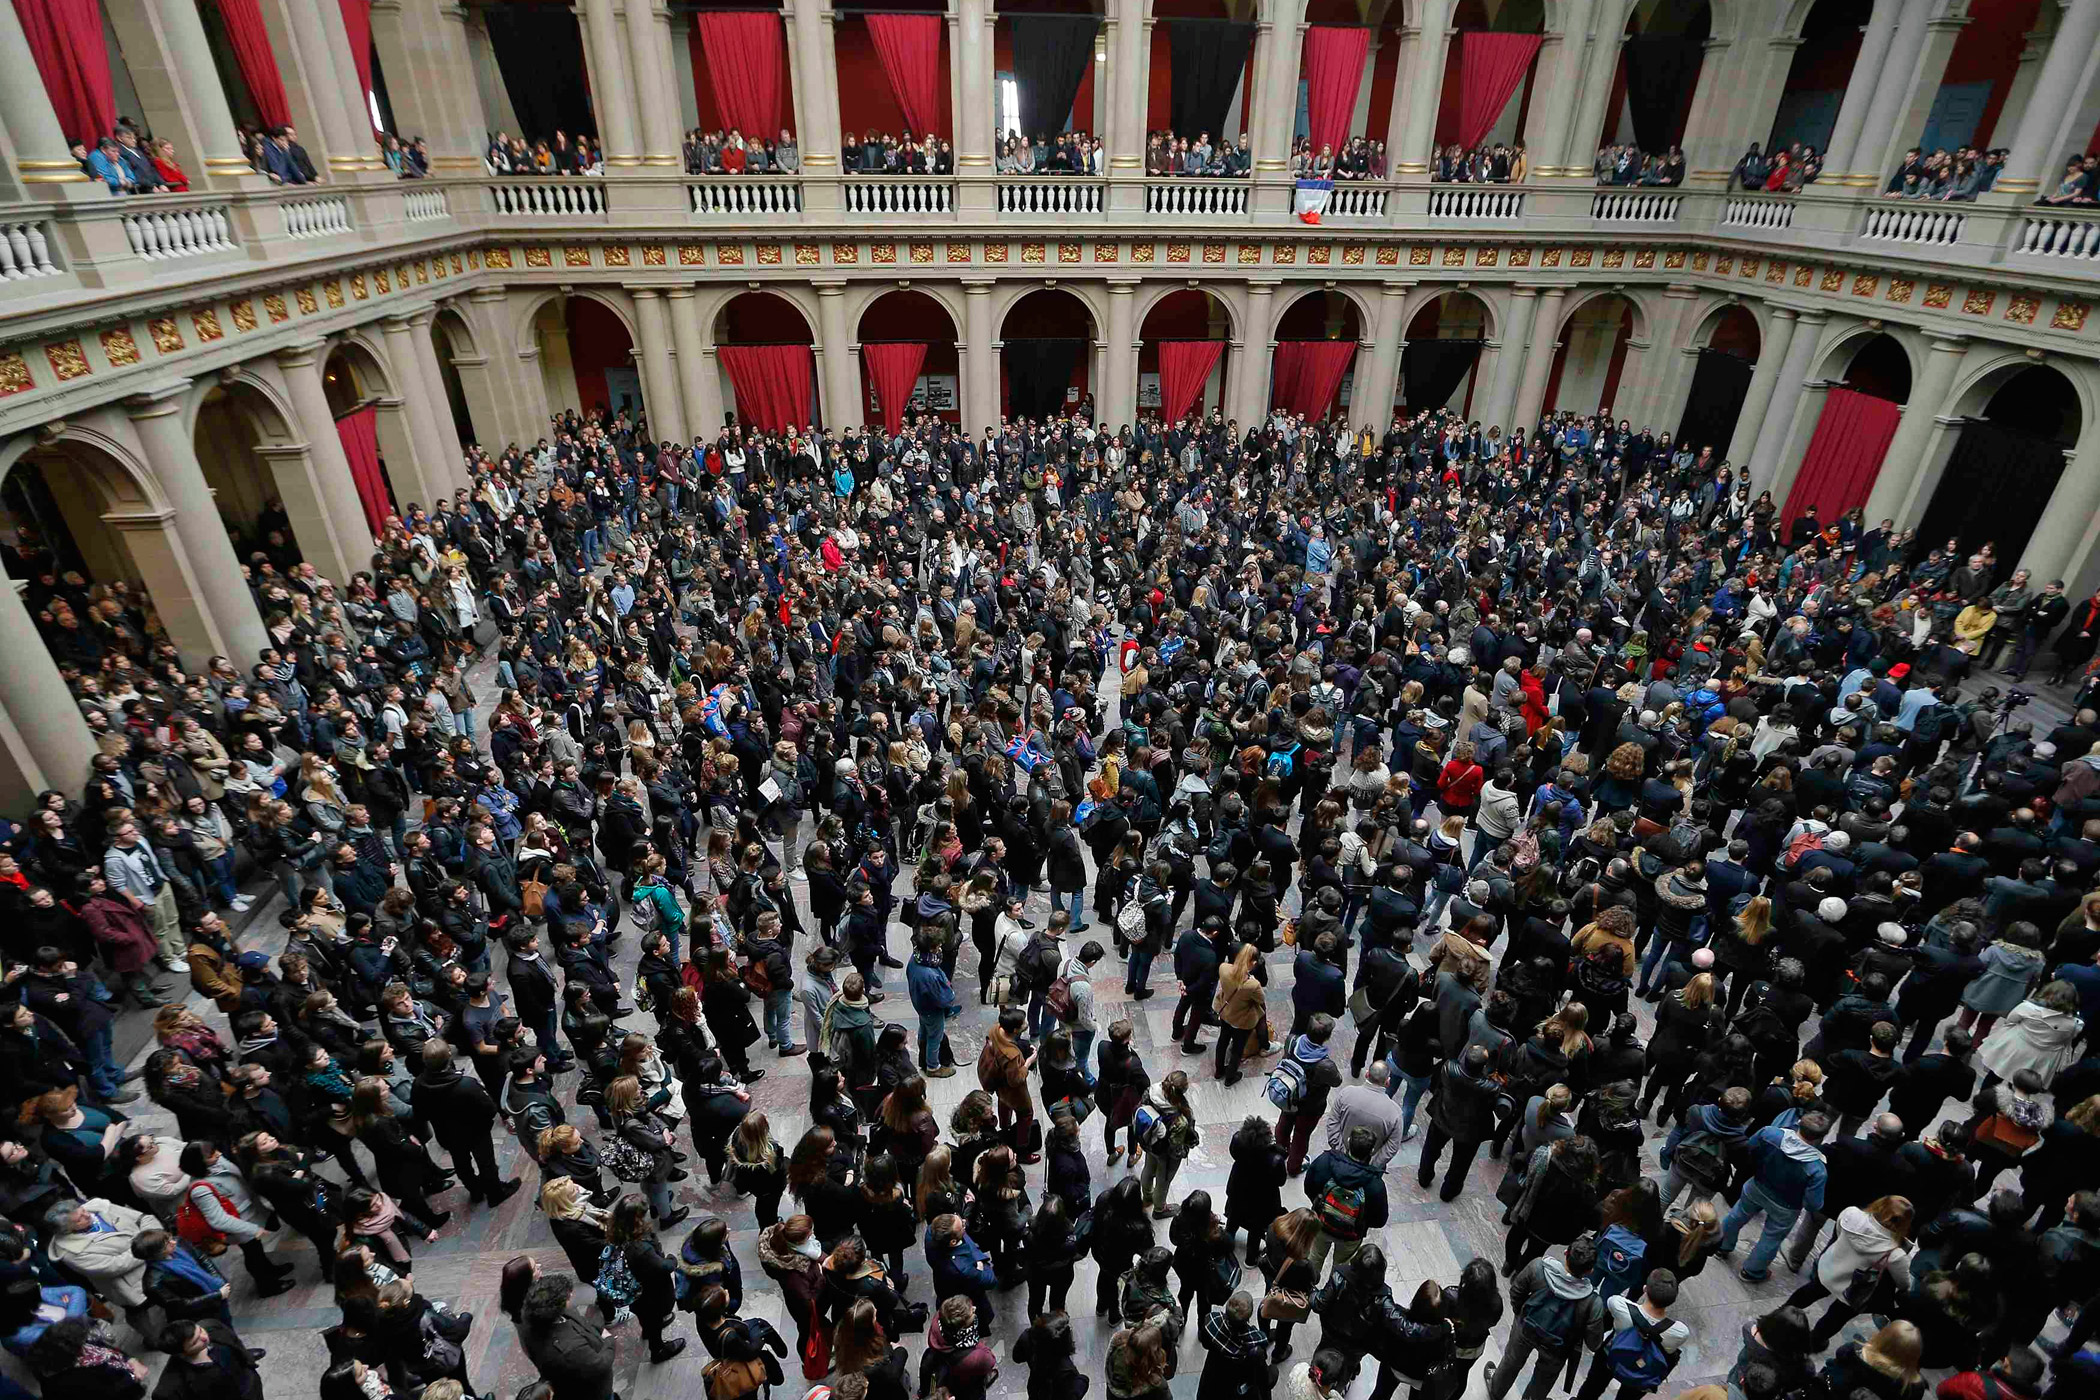 Students and teachers of Strasbourg University observe a minute of silence at the "Palais Universitaire" in Strasbourg, to pay tribute to victims of Friday's attacks on Paris.